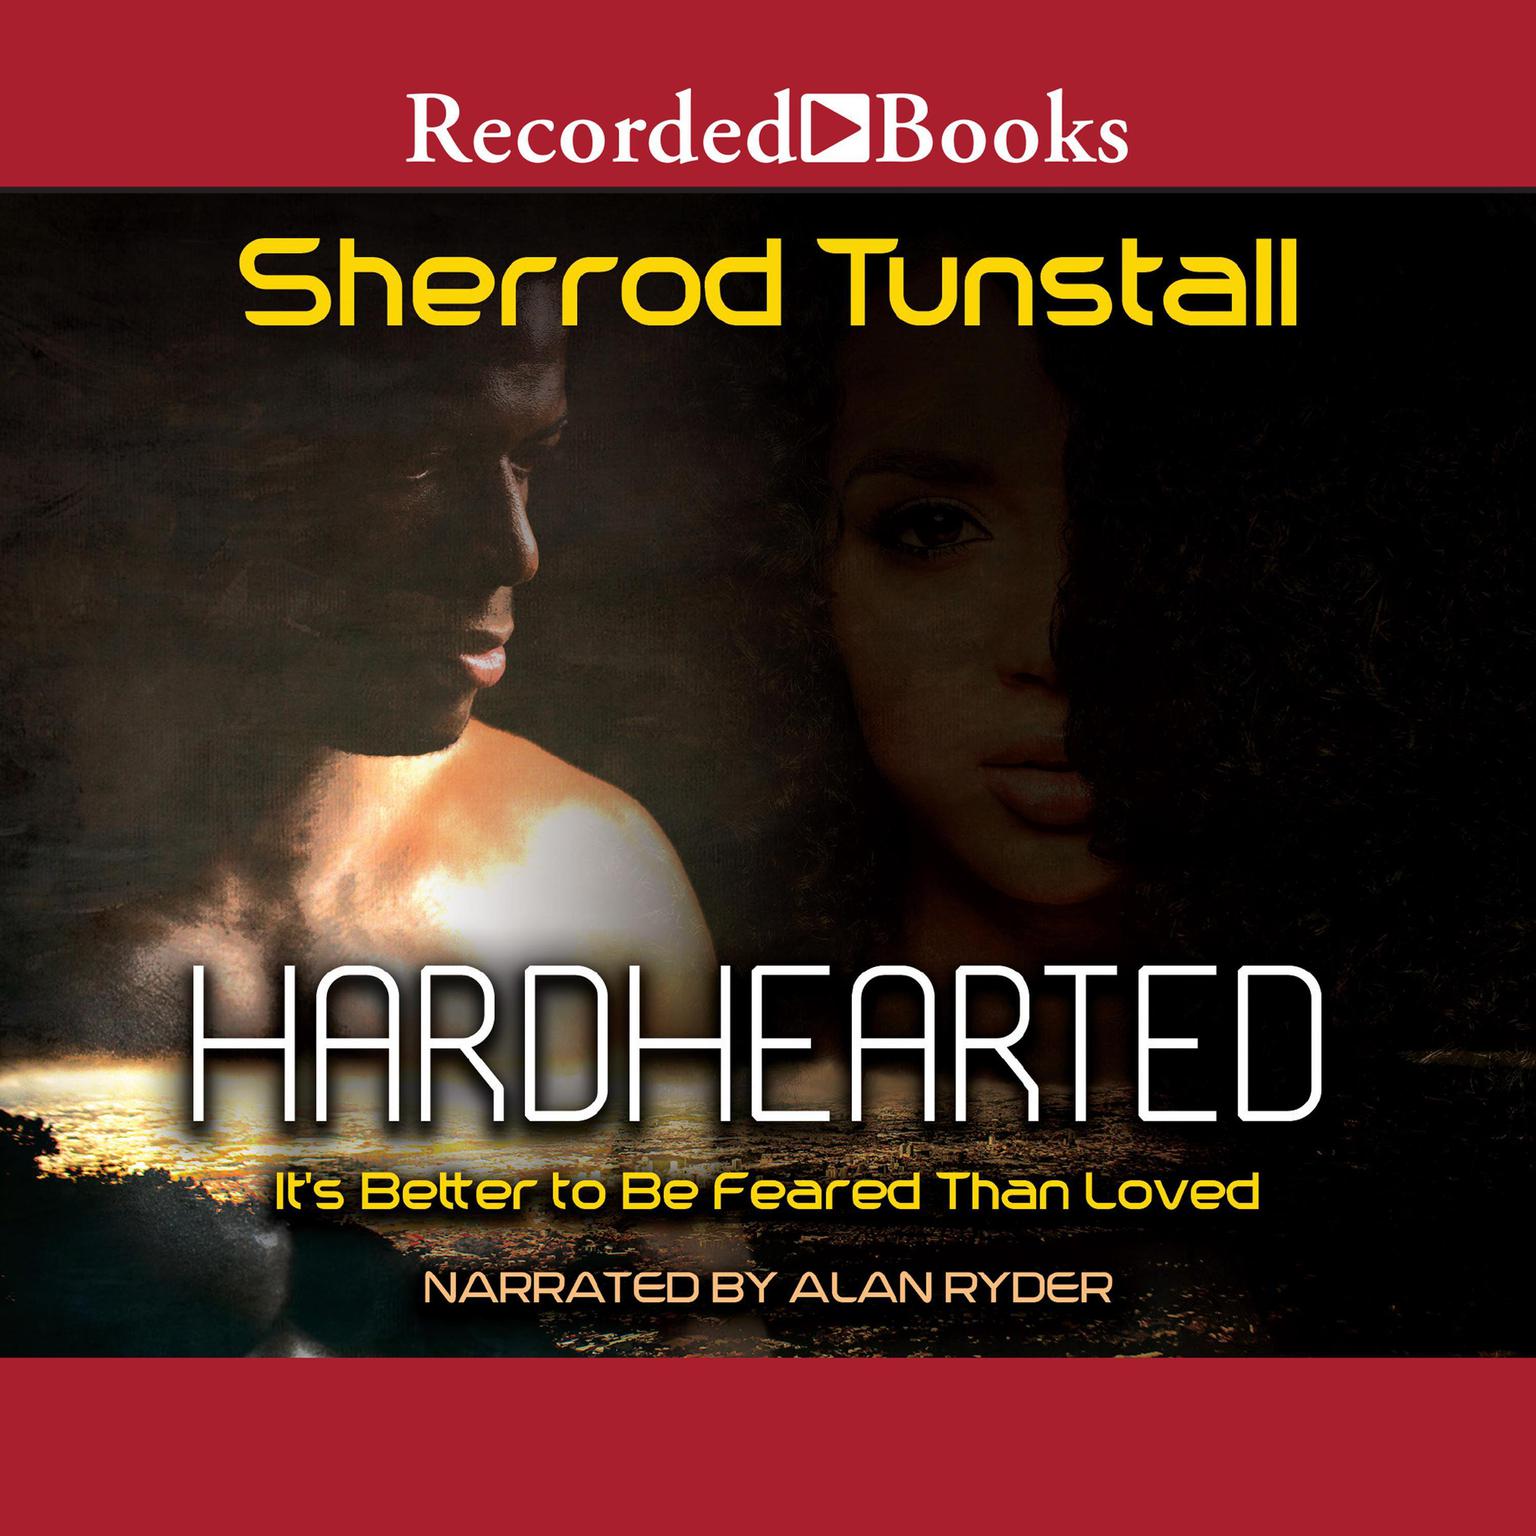 Hardhearted: Its Better to Be Feared than Loved Audiobook, by Sherrod Tunstall